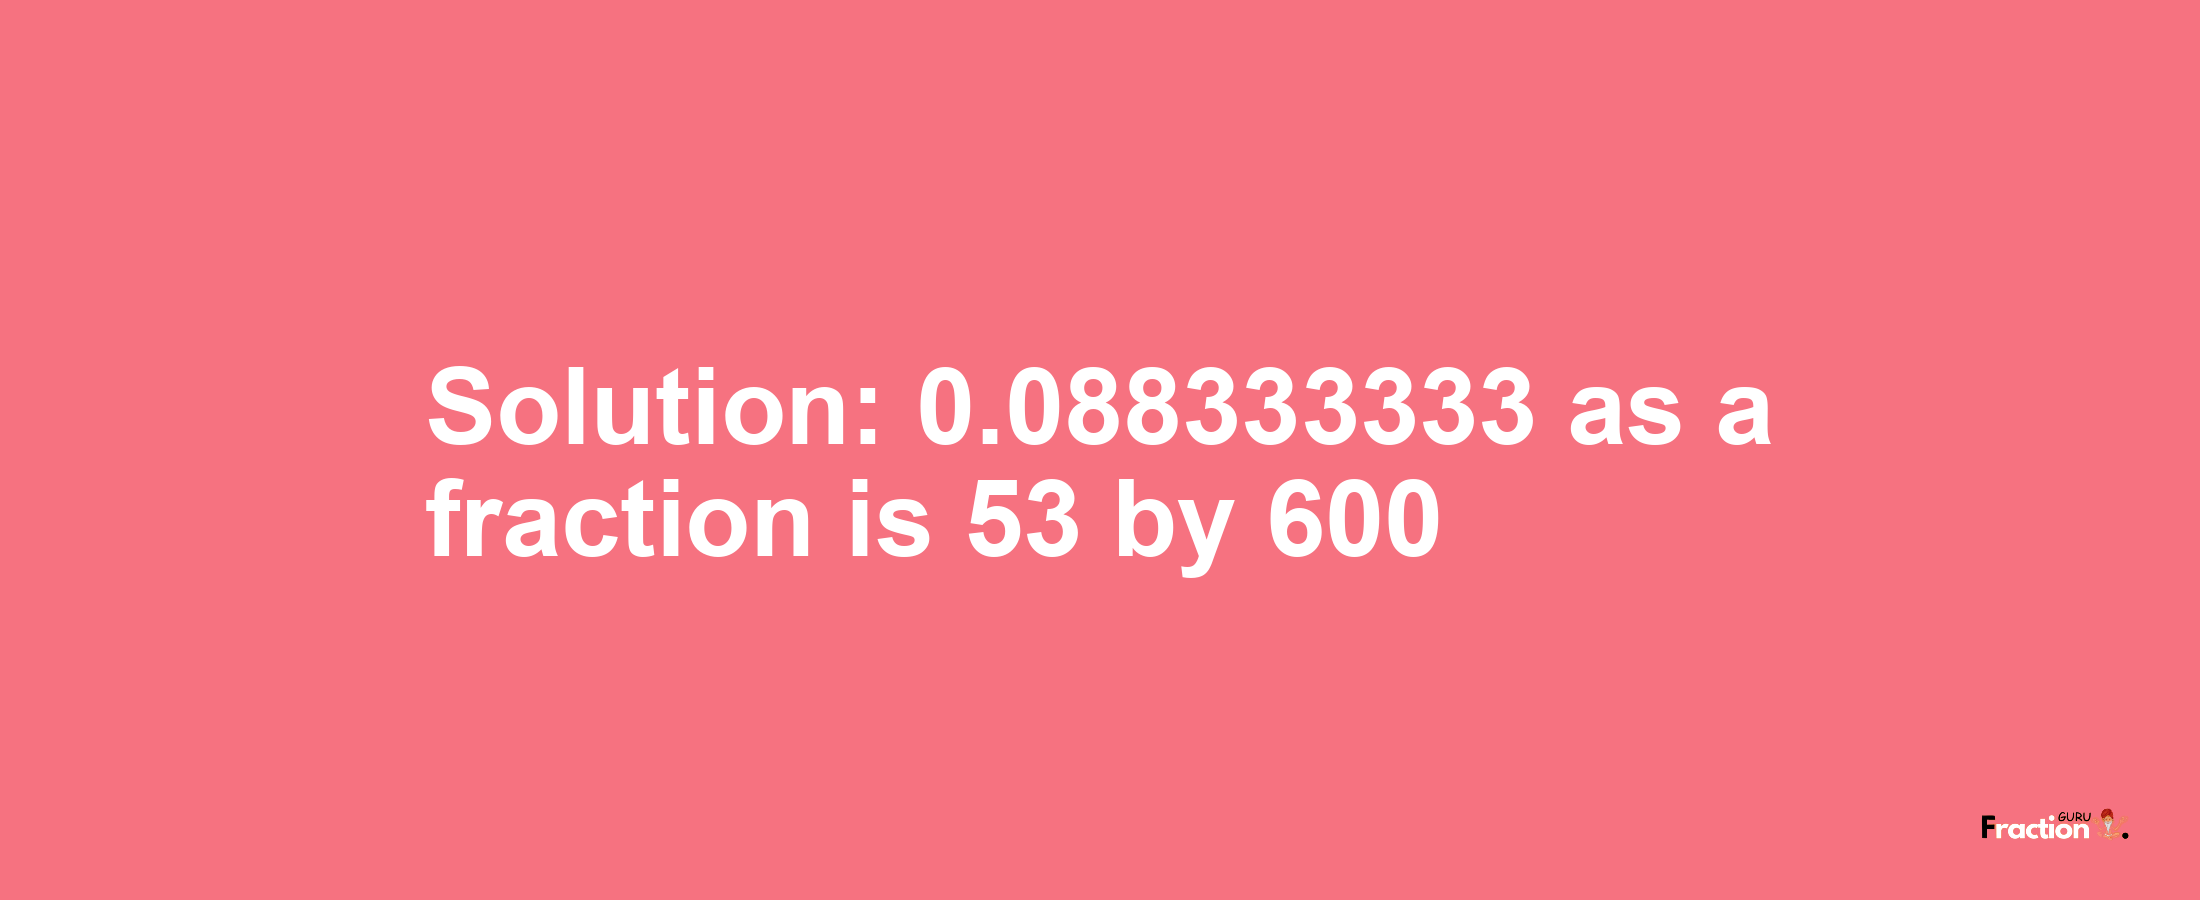 Solution:0.088333333 as a fraction is 53/600